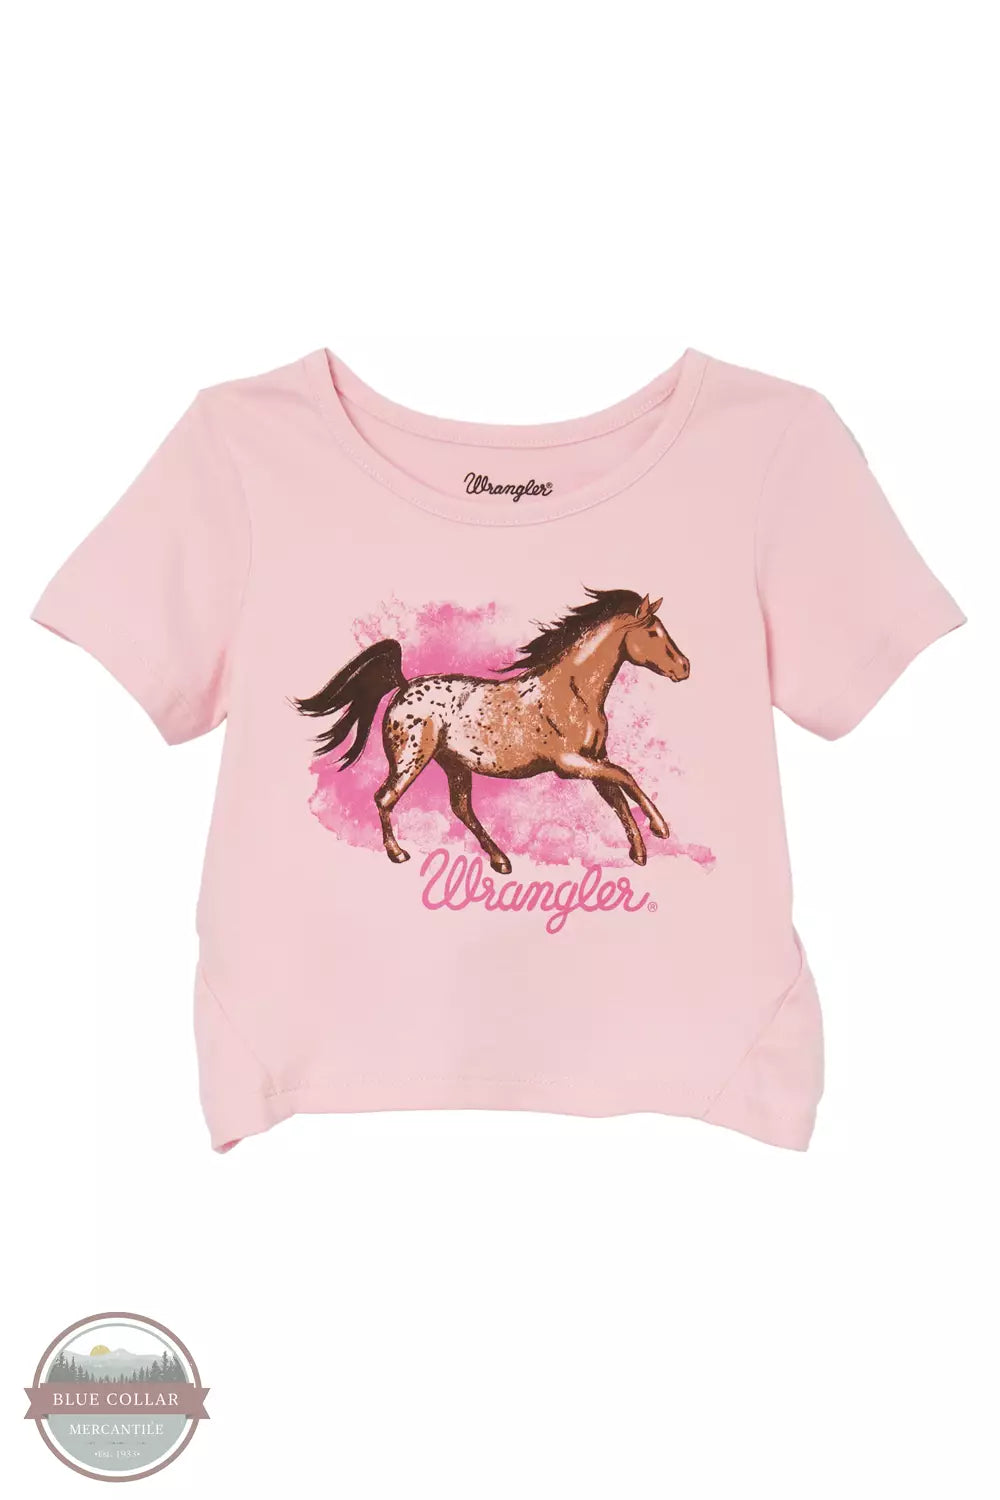 Wrangler 112344360 Running Horse Short Sleeve T-Shirt in Pink Front View